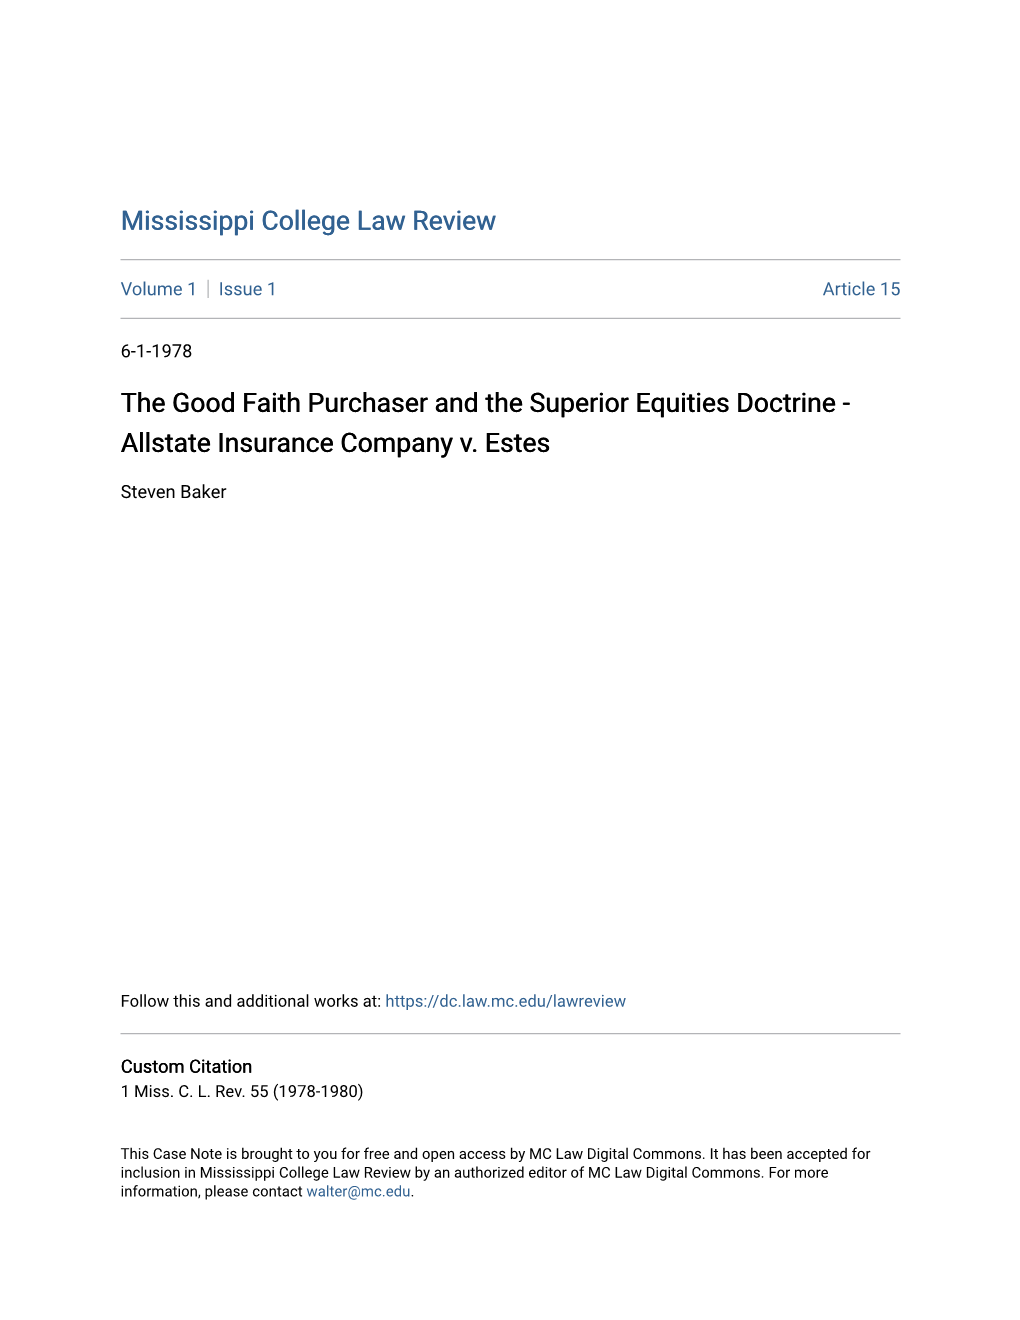 The Good Faith Purchaser and the Superior Equities Doctrine - Allstate Insurance Company V